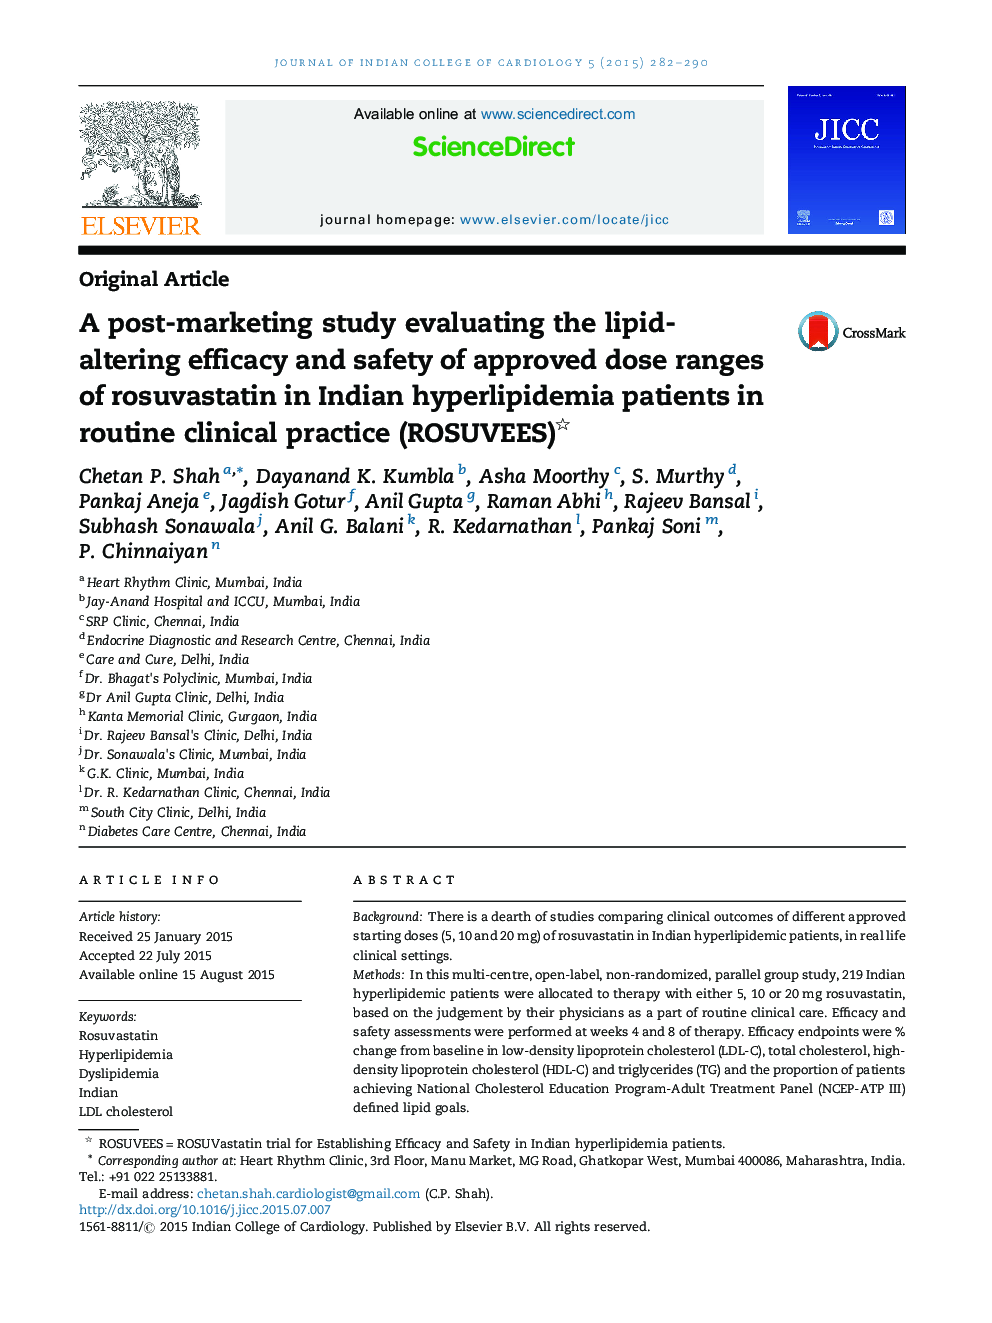 A post-marketing study evaluating the lipid-altering efficacy and safety of approved dose ranges of rosuvastatin in Indian hyperlipidemia patients in routine clinical practice (ROSUVEES)